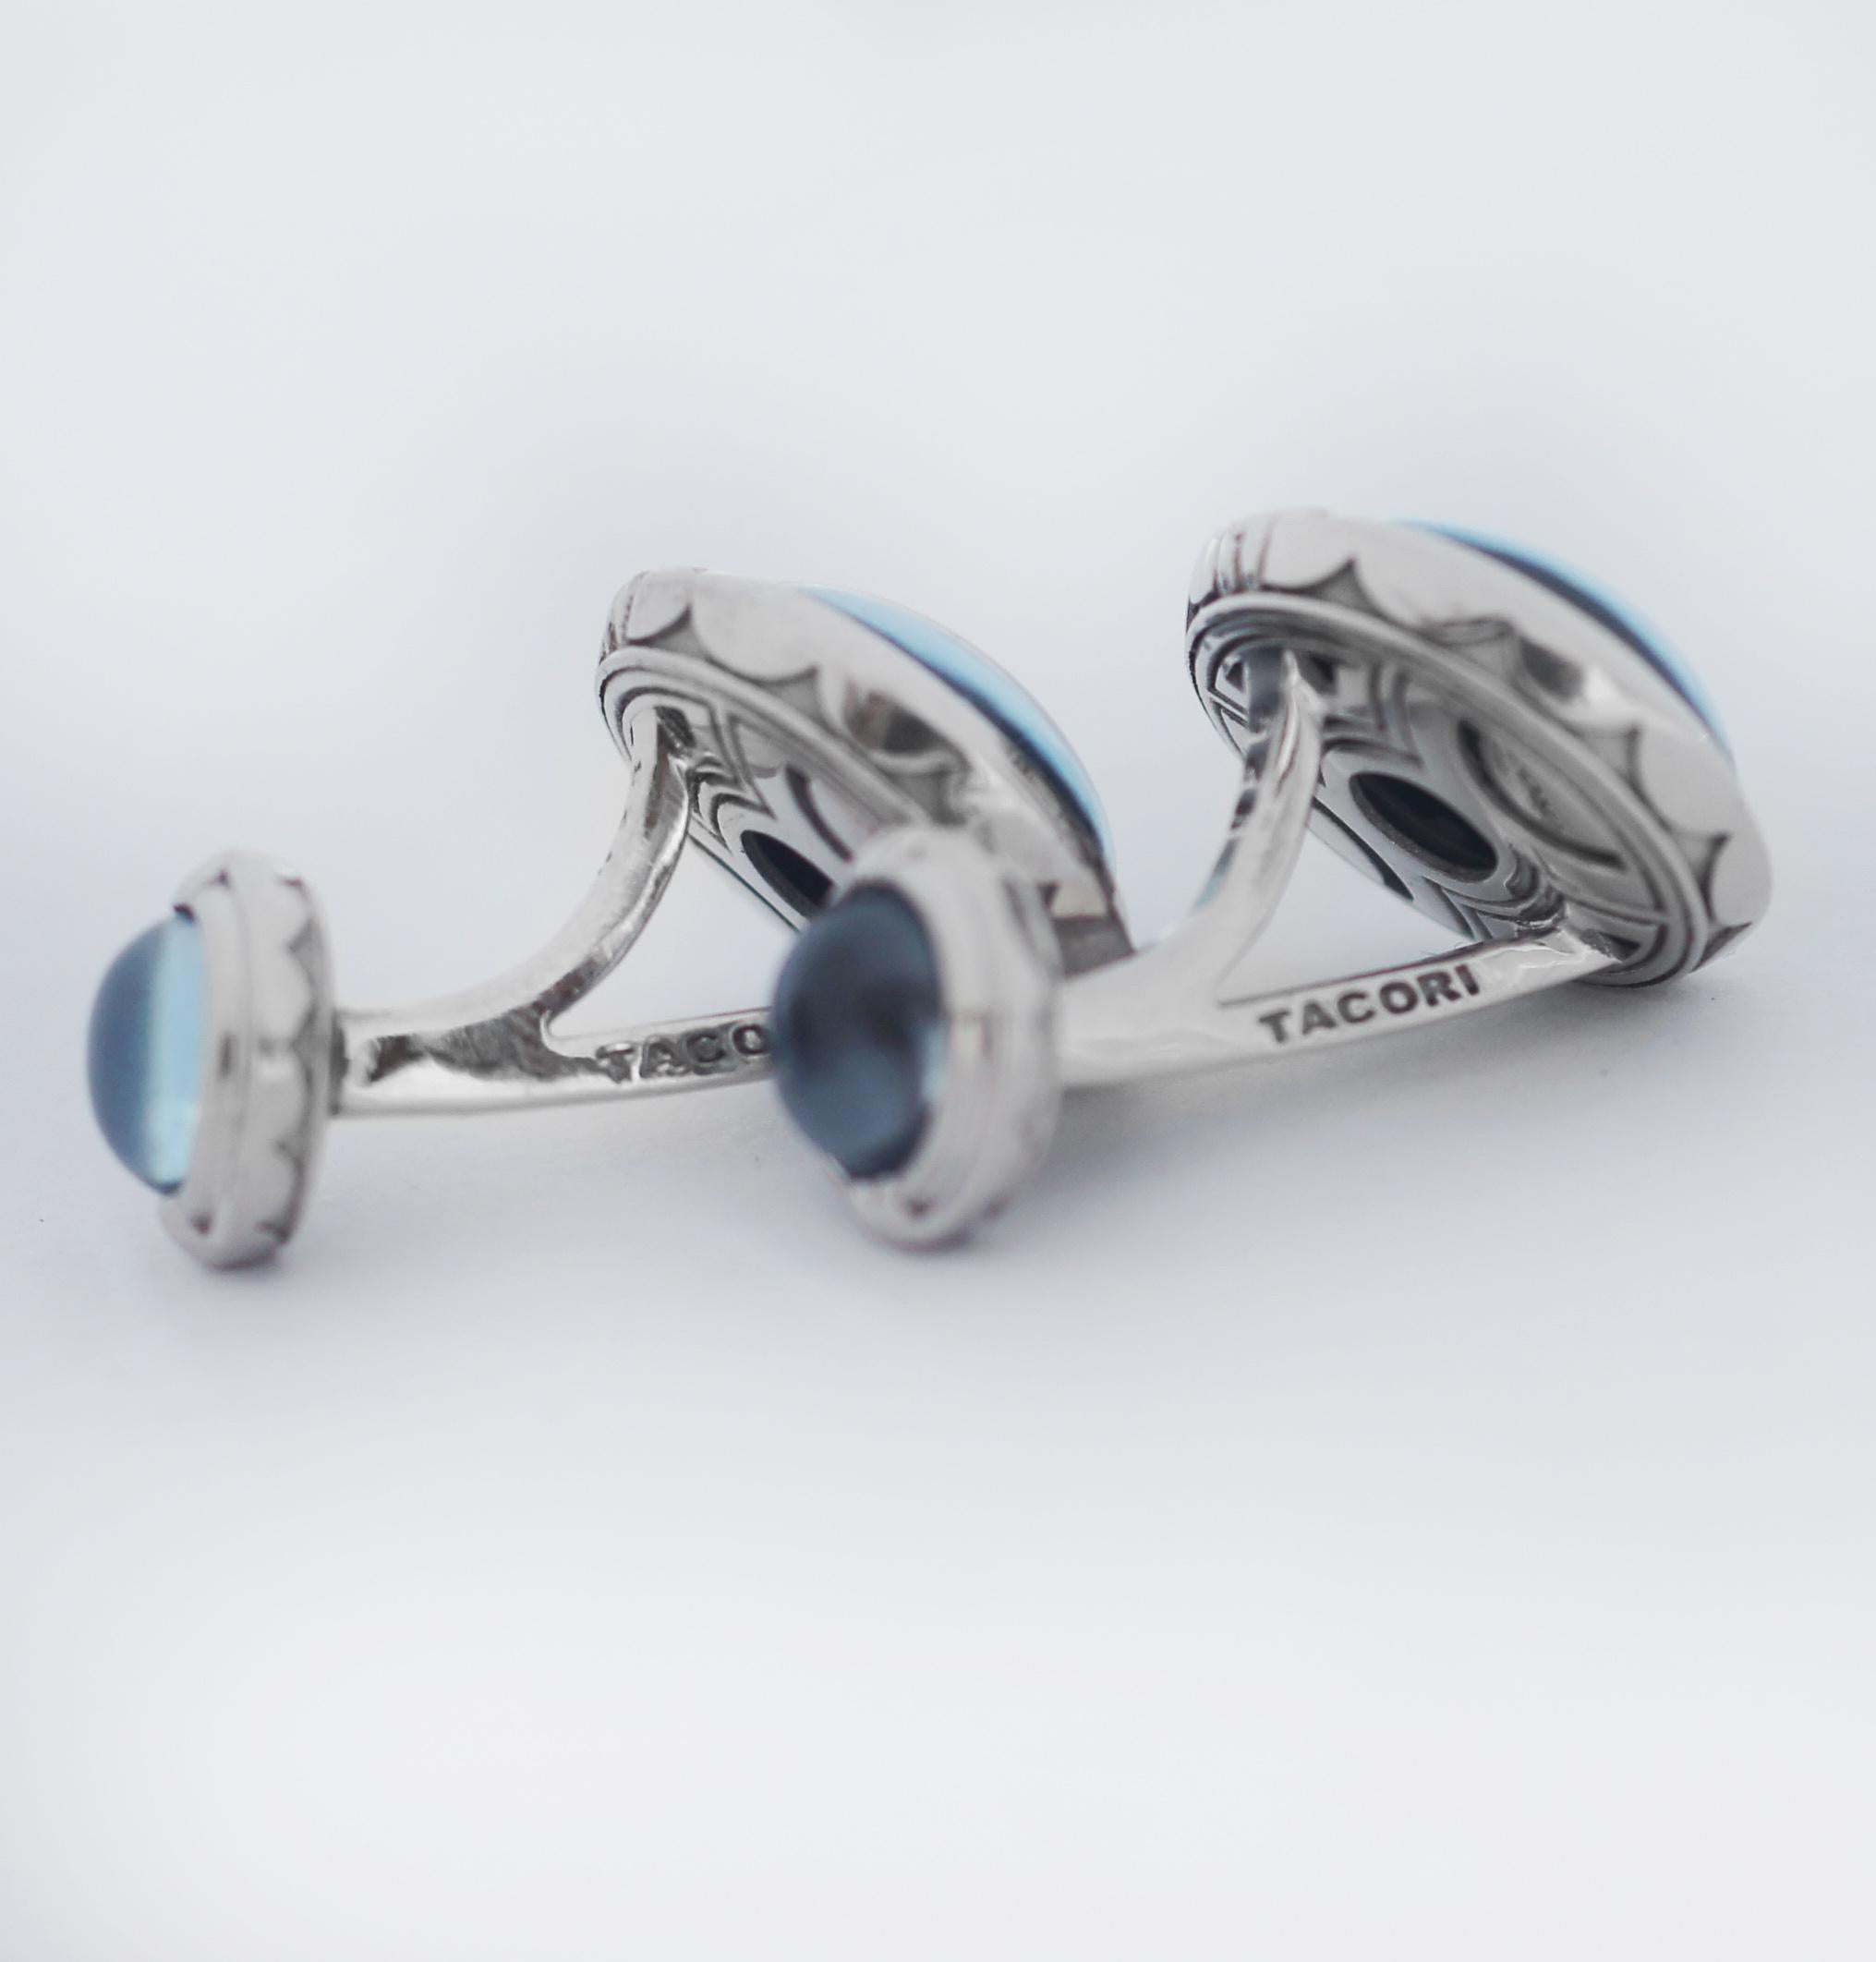 TACORI
Retro Classic
Cabochon Cuff Links featuring Round Sky Blue Hematite on both sides of cufflink 
Tacori reference Style ID MCL10537
Silver 925
In great looking condition, wear consistent with time and Light use,
See images, please
NO original